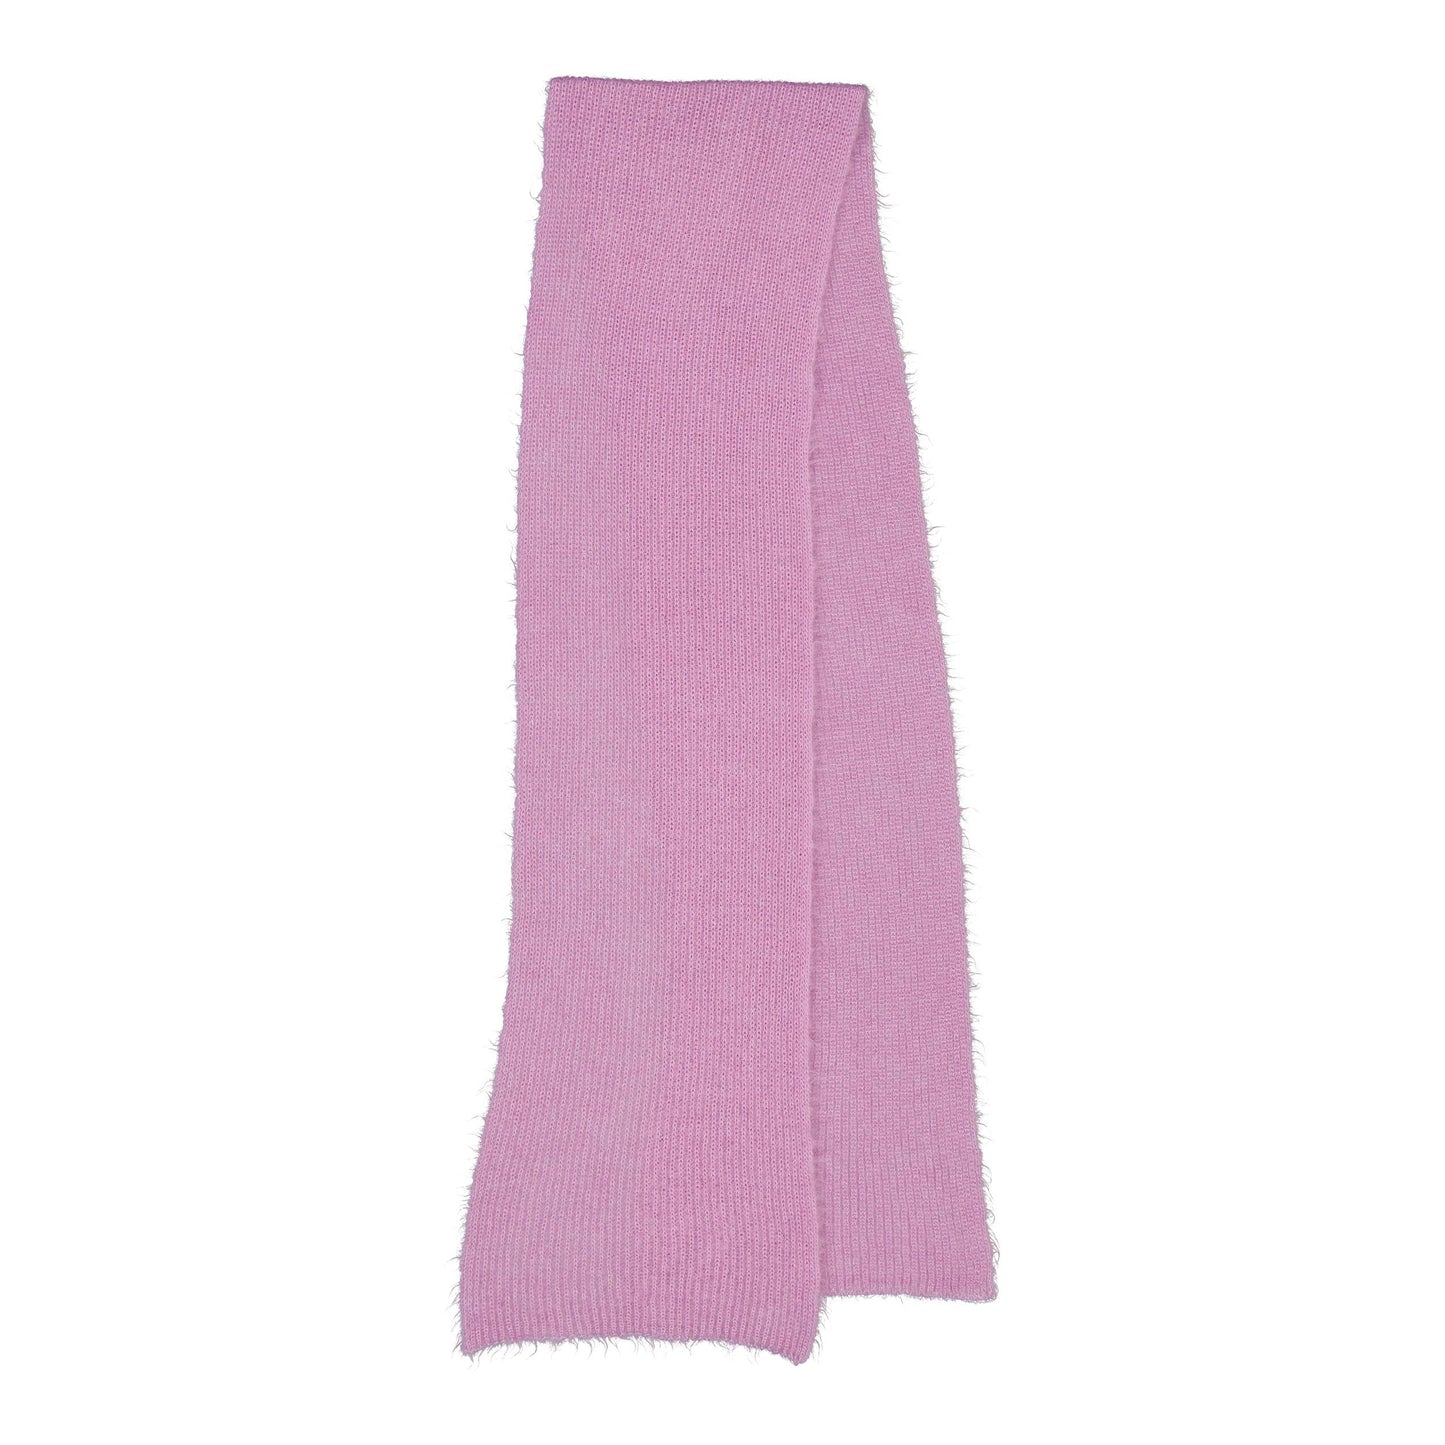 BLISS - RIBBED SCARF LILAS